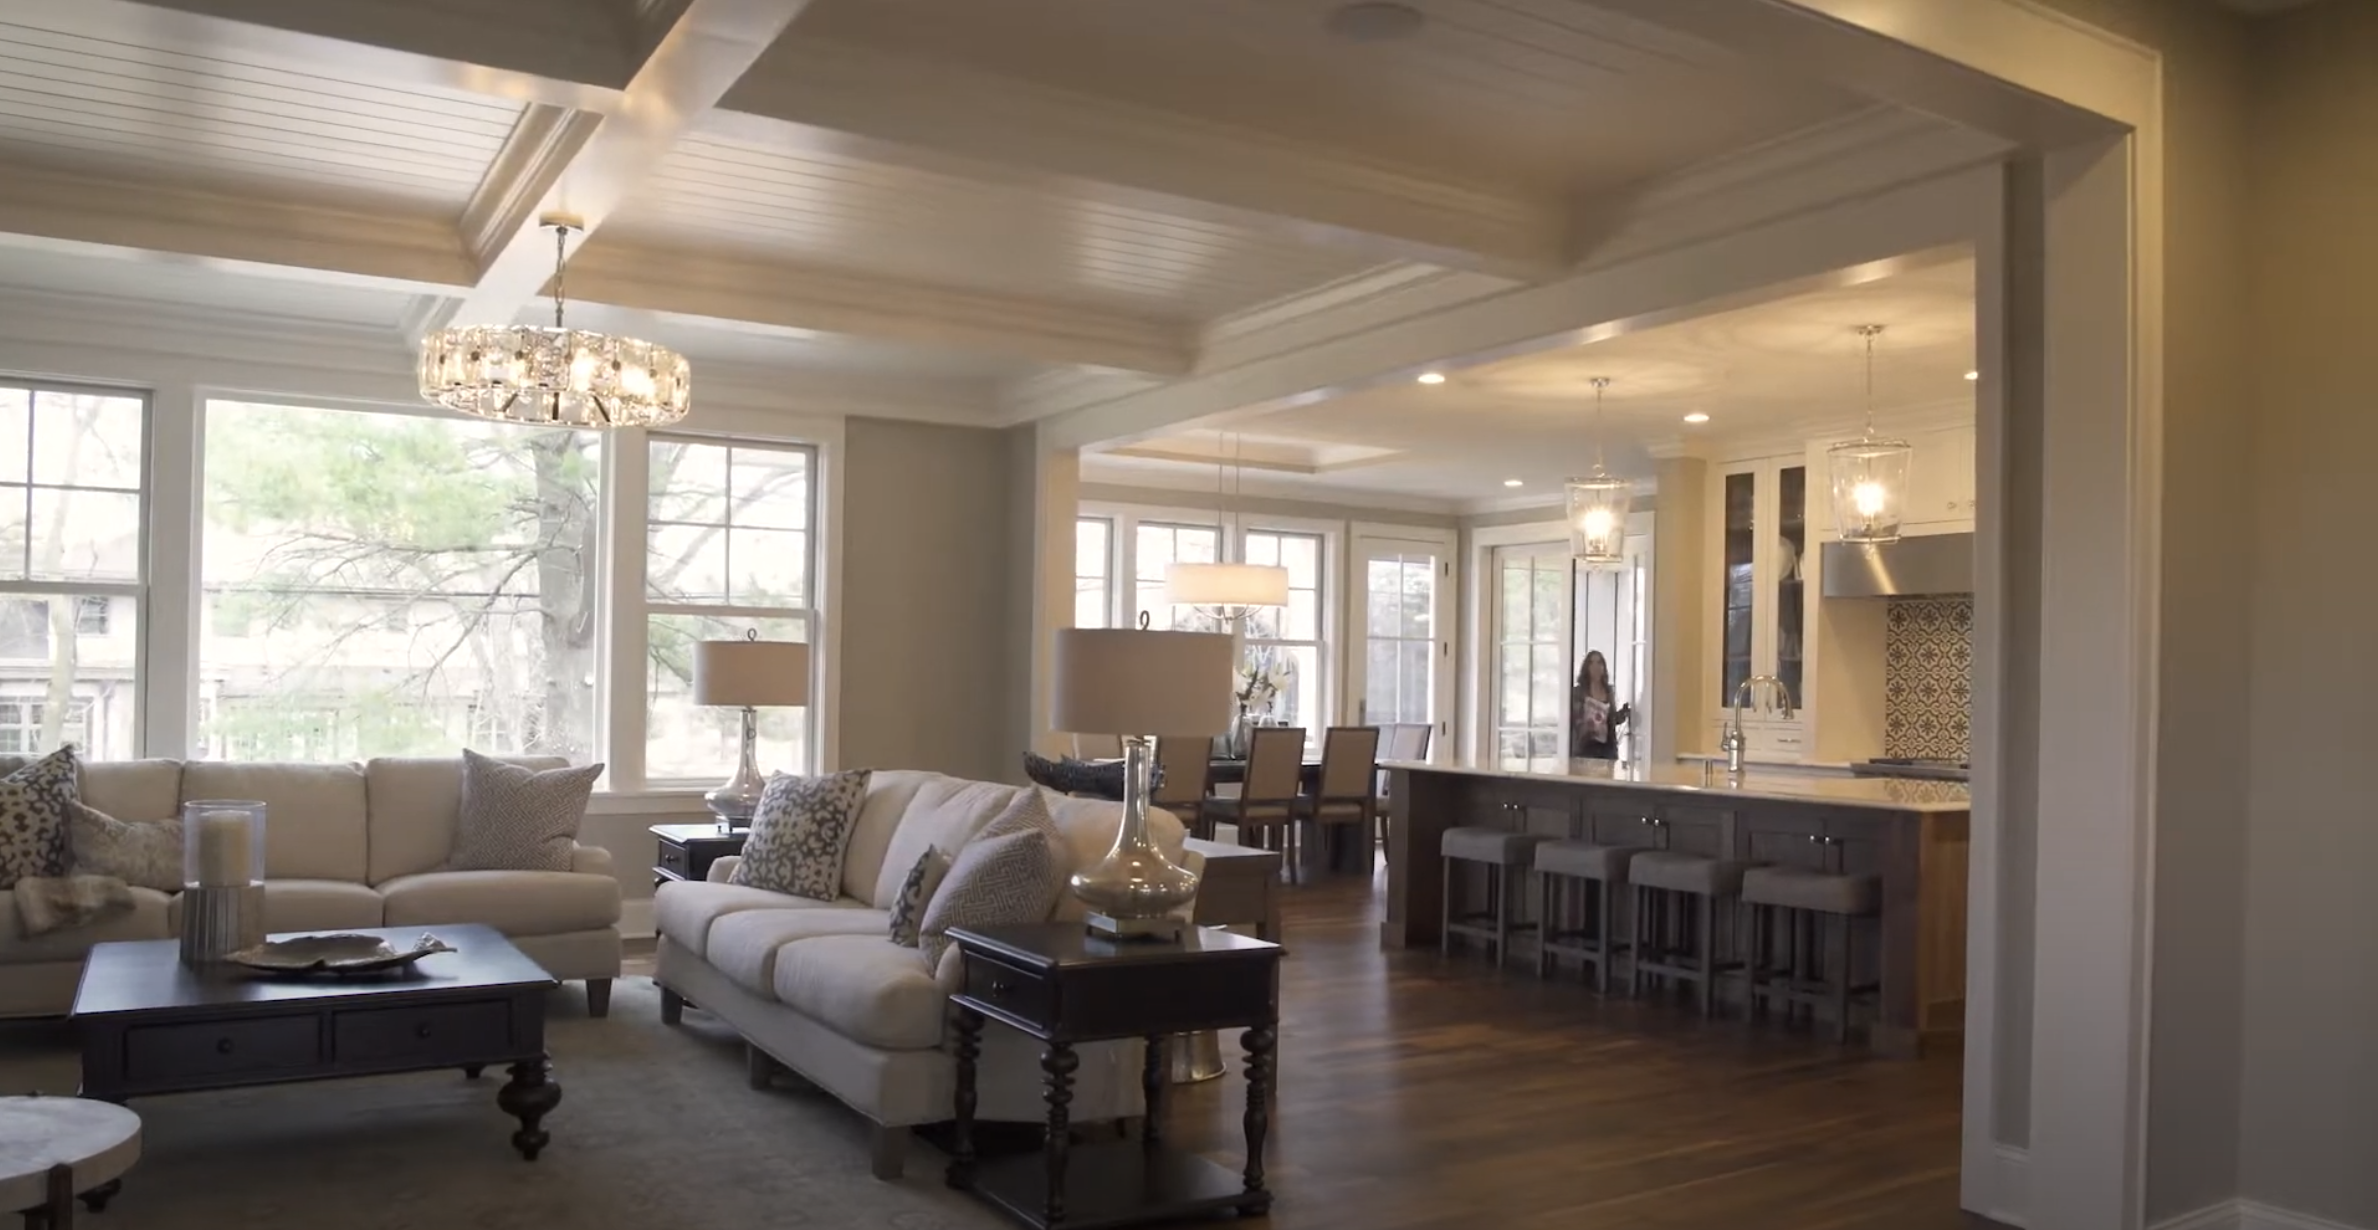 Custom Home Build Video Series: A living room and dining room in a newly built home.